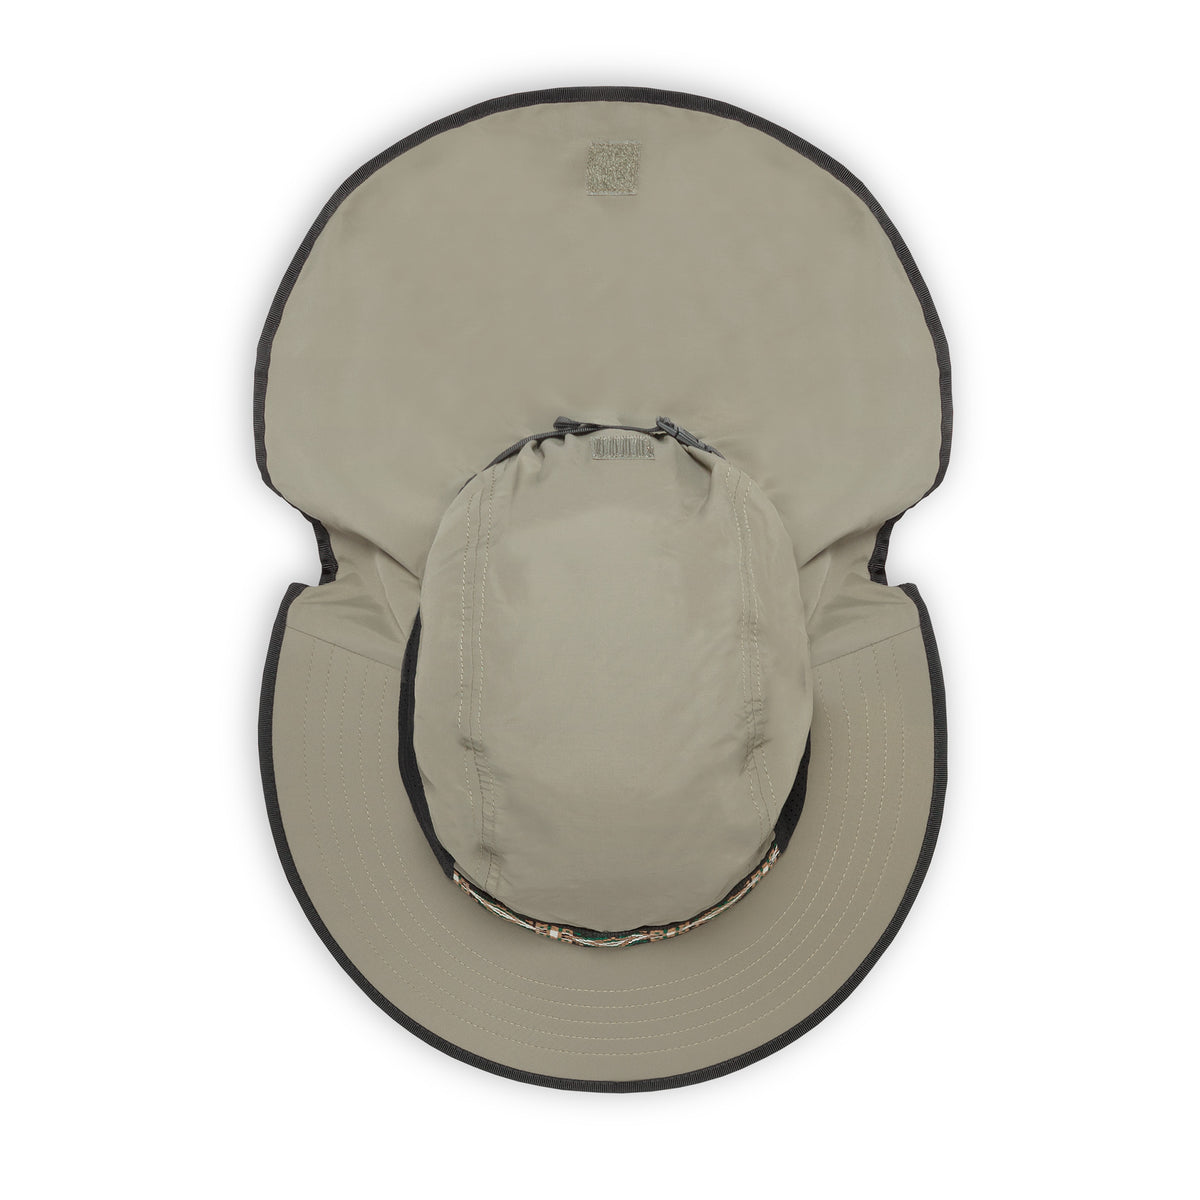 Buy Home Prefer Mens Sun Hat with Flap Summer Neck Cover